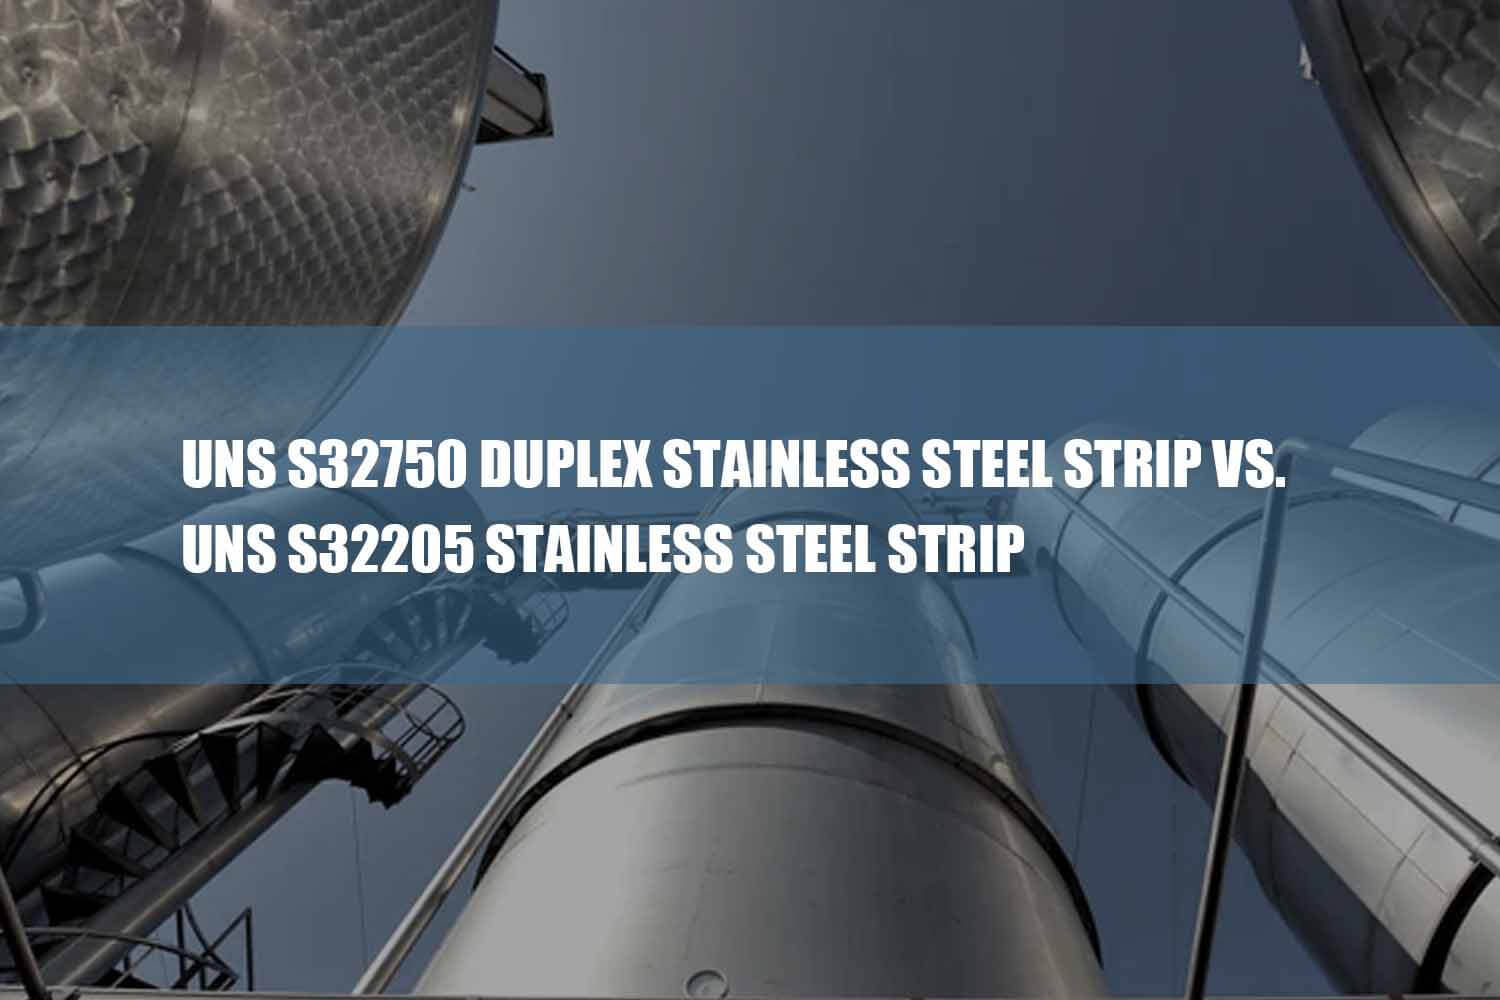 uns s32750 duplex stainless steel strip vs. uns s32205 stainless steel strip